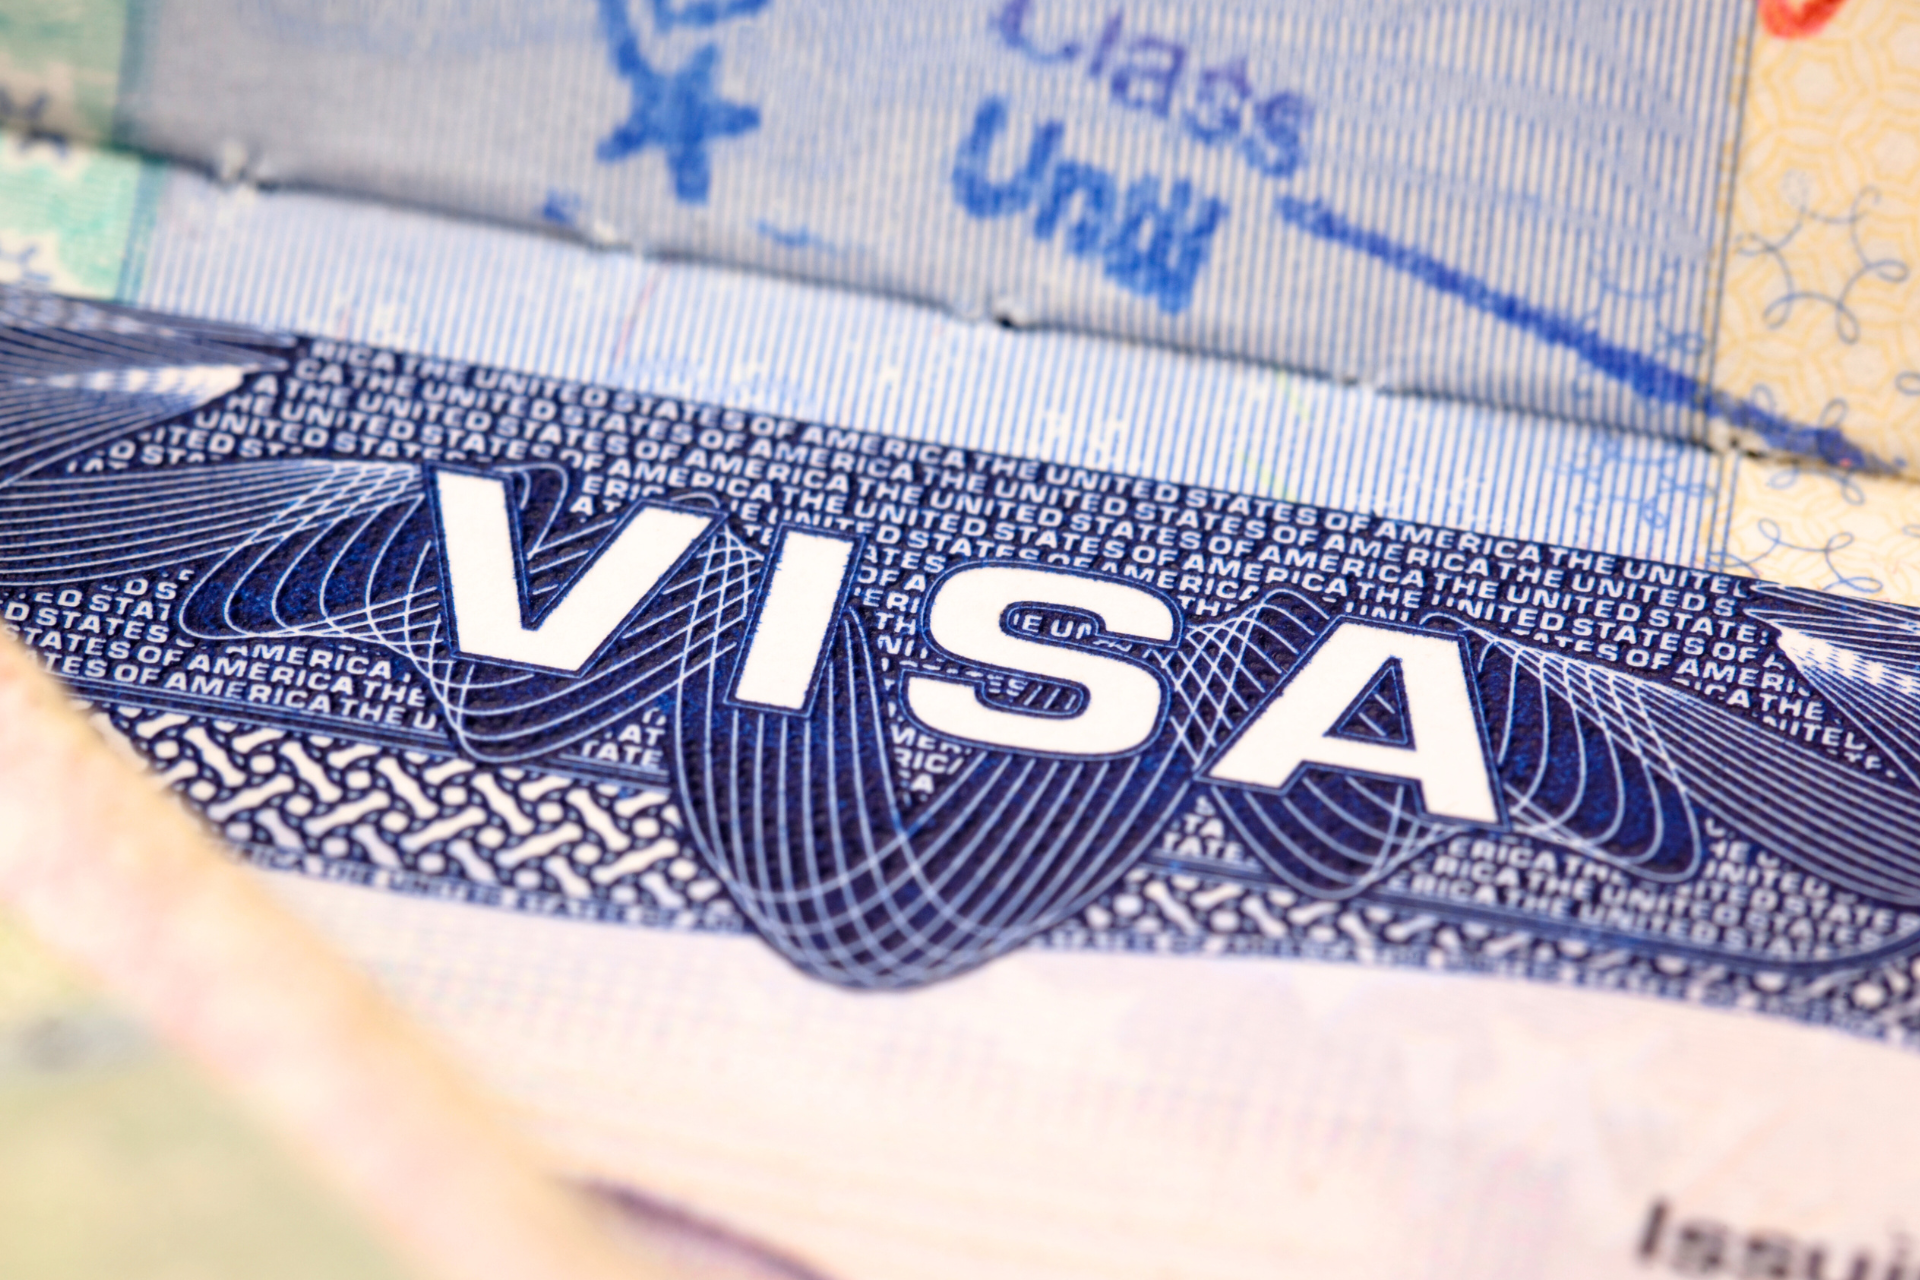 H-1B Proposal Modernizes H-1B Requirements and Oversight, Provides Limited Flexibility for F-1 Student Visa Program